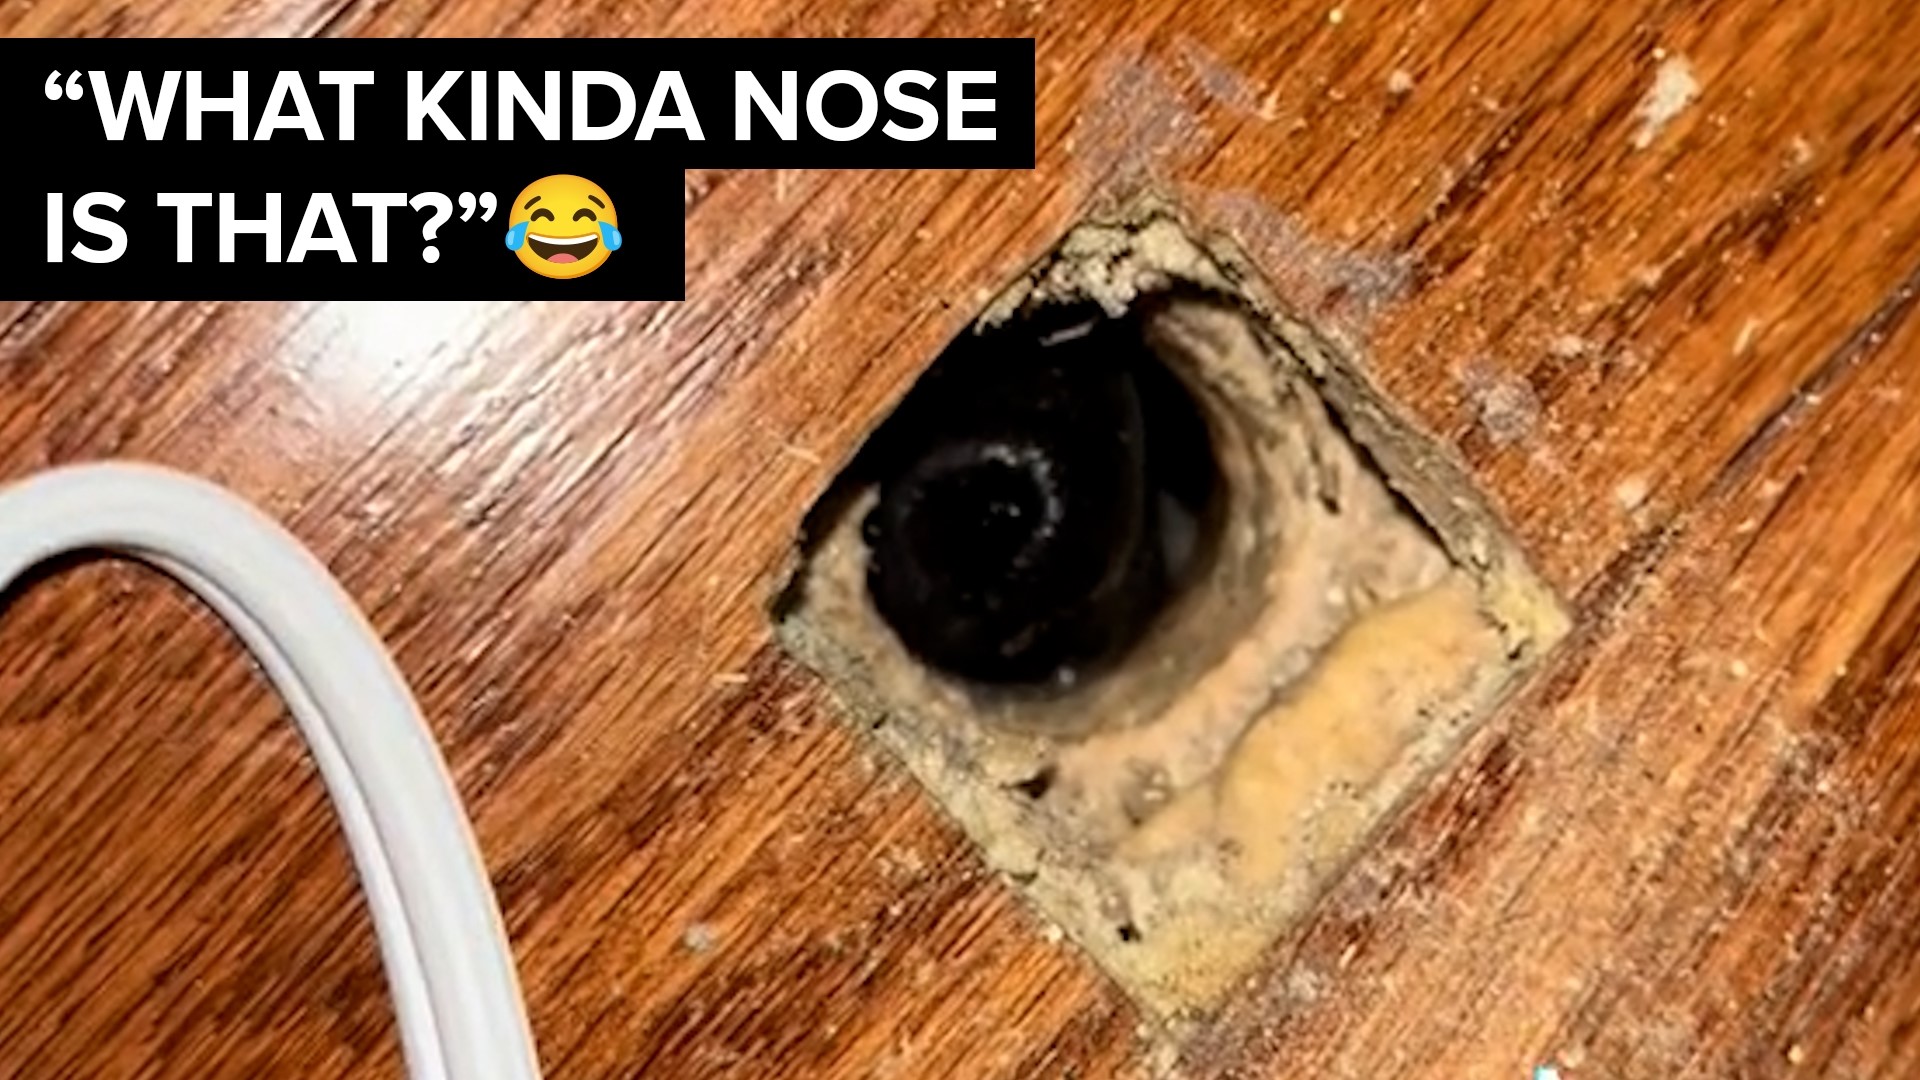 A video of a hole in Robert Bishop's Fayetteville home quickly took TikTok by storm after many speculated what critter was sniffing around.